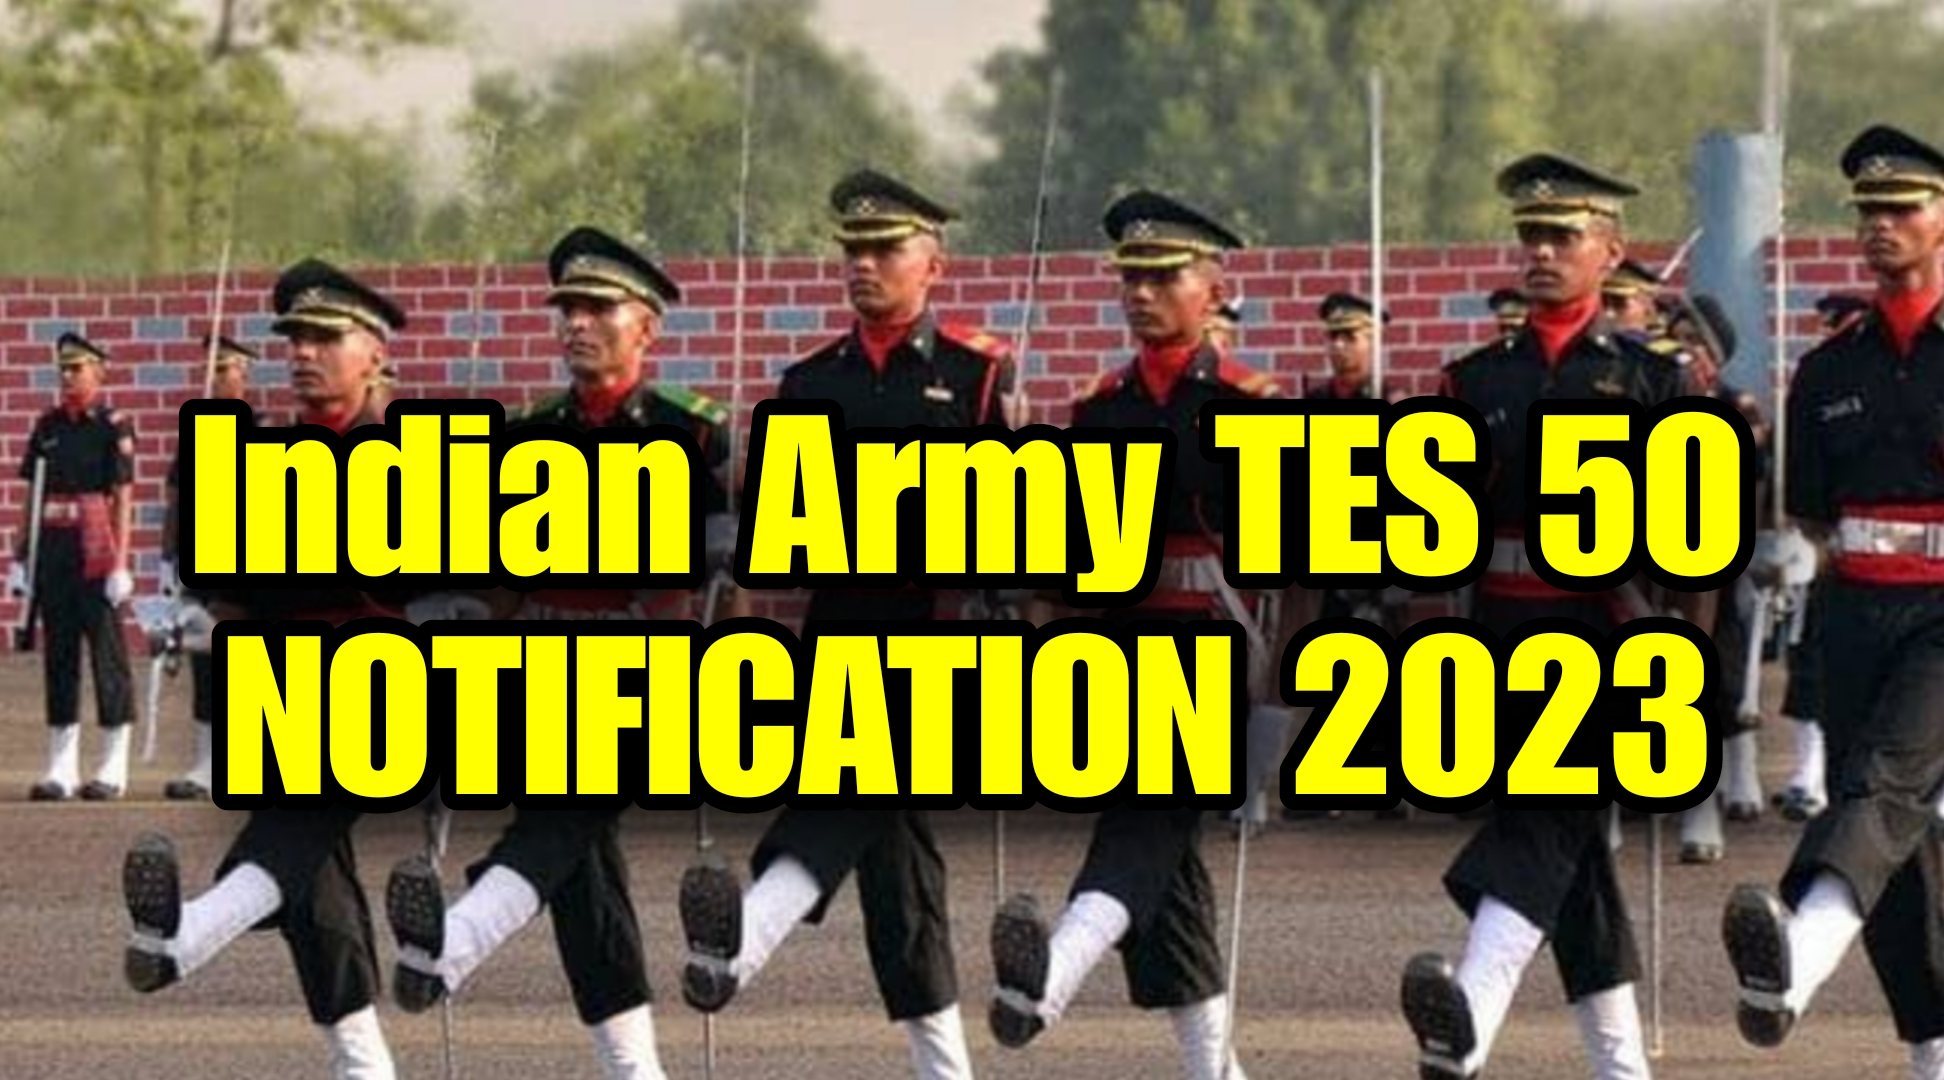 Indian Army TES 50 2023 Notification Full Details